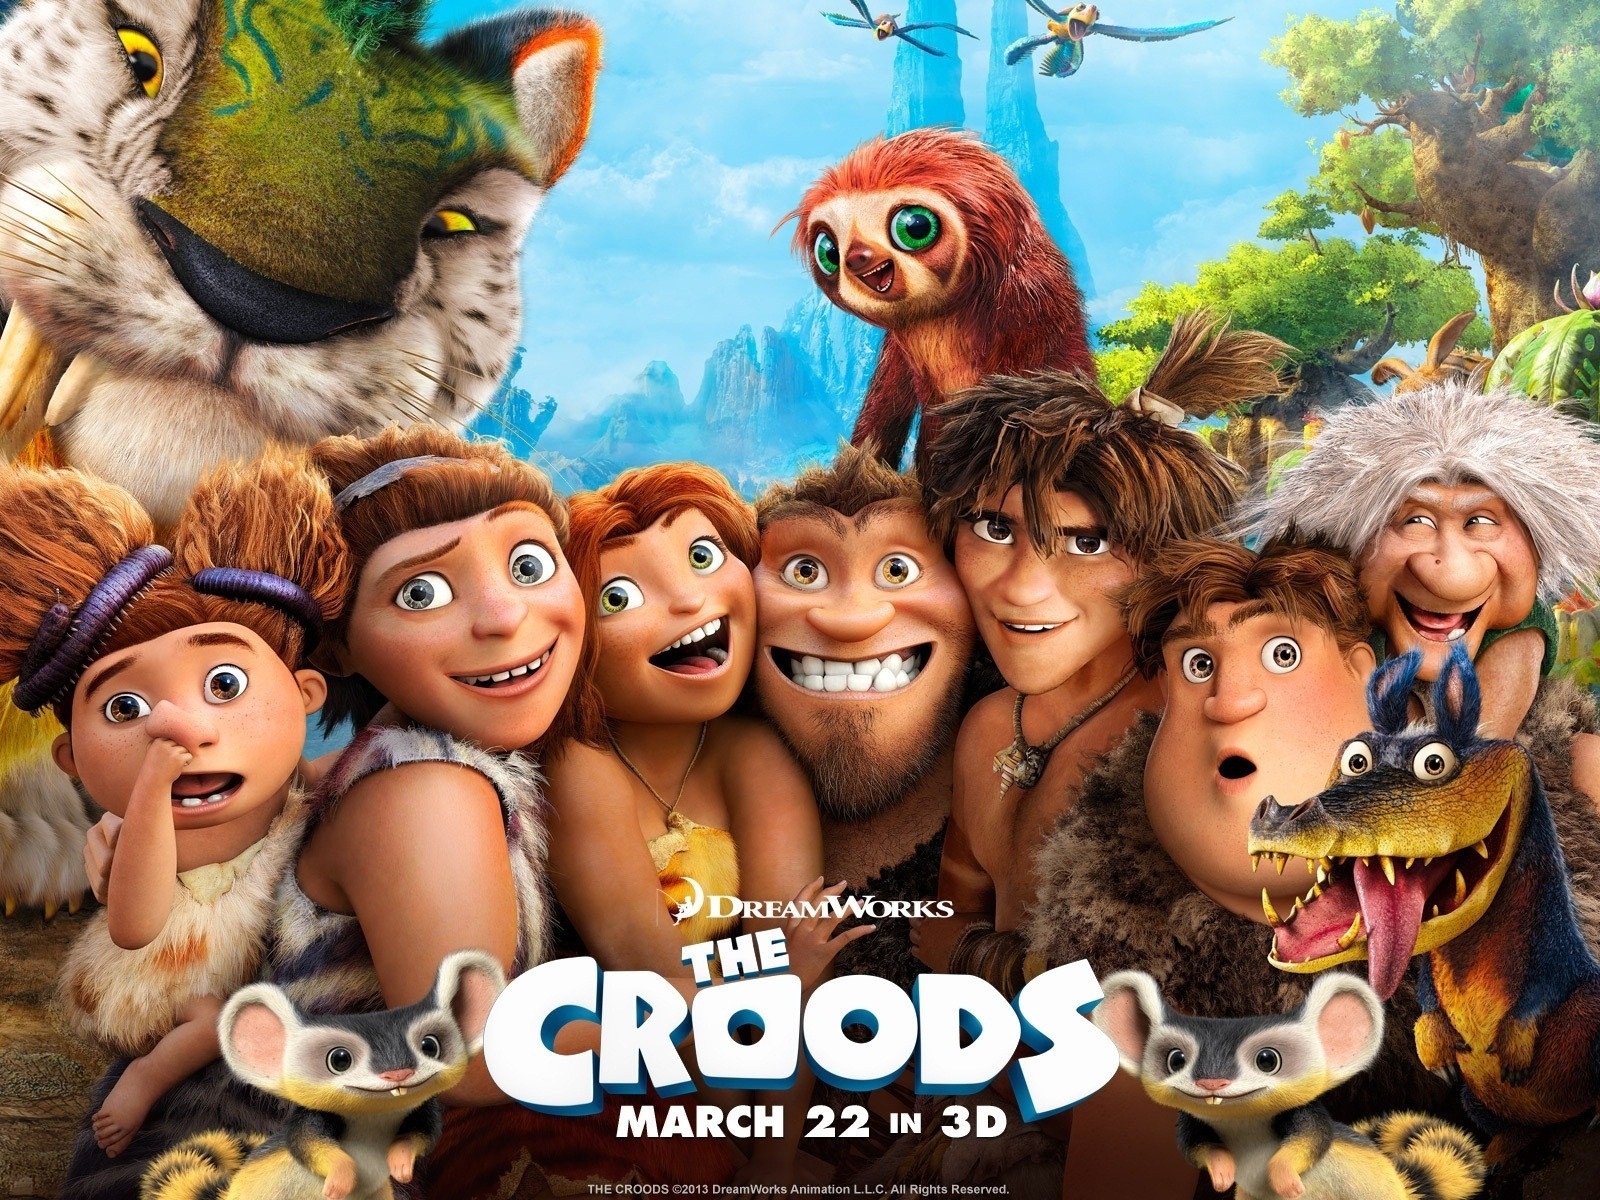 The Croods HD movie wallpapers #1 - 1600x1200